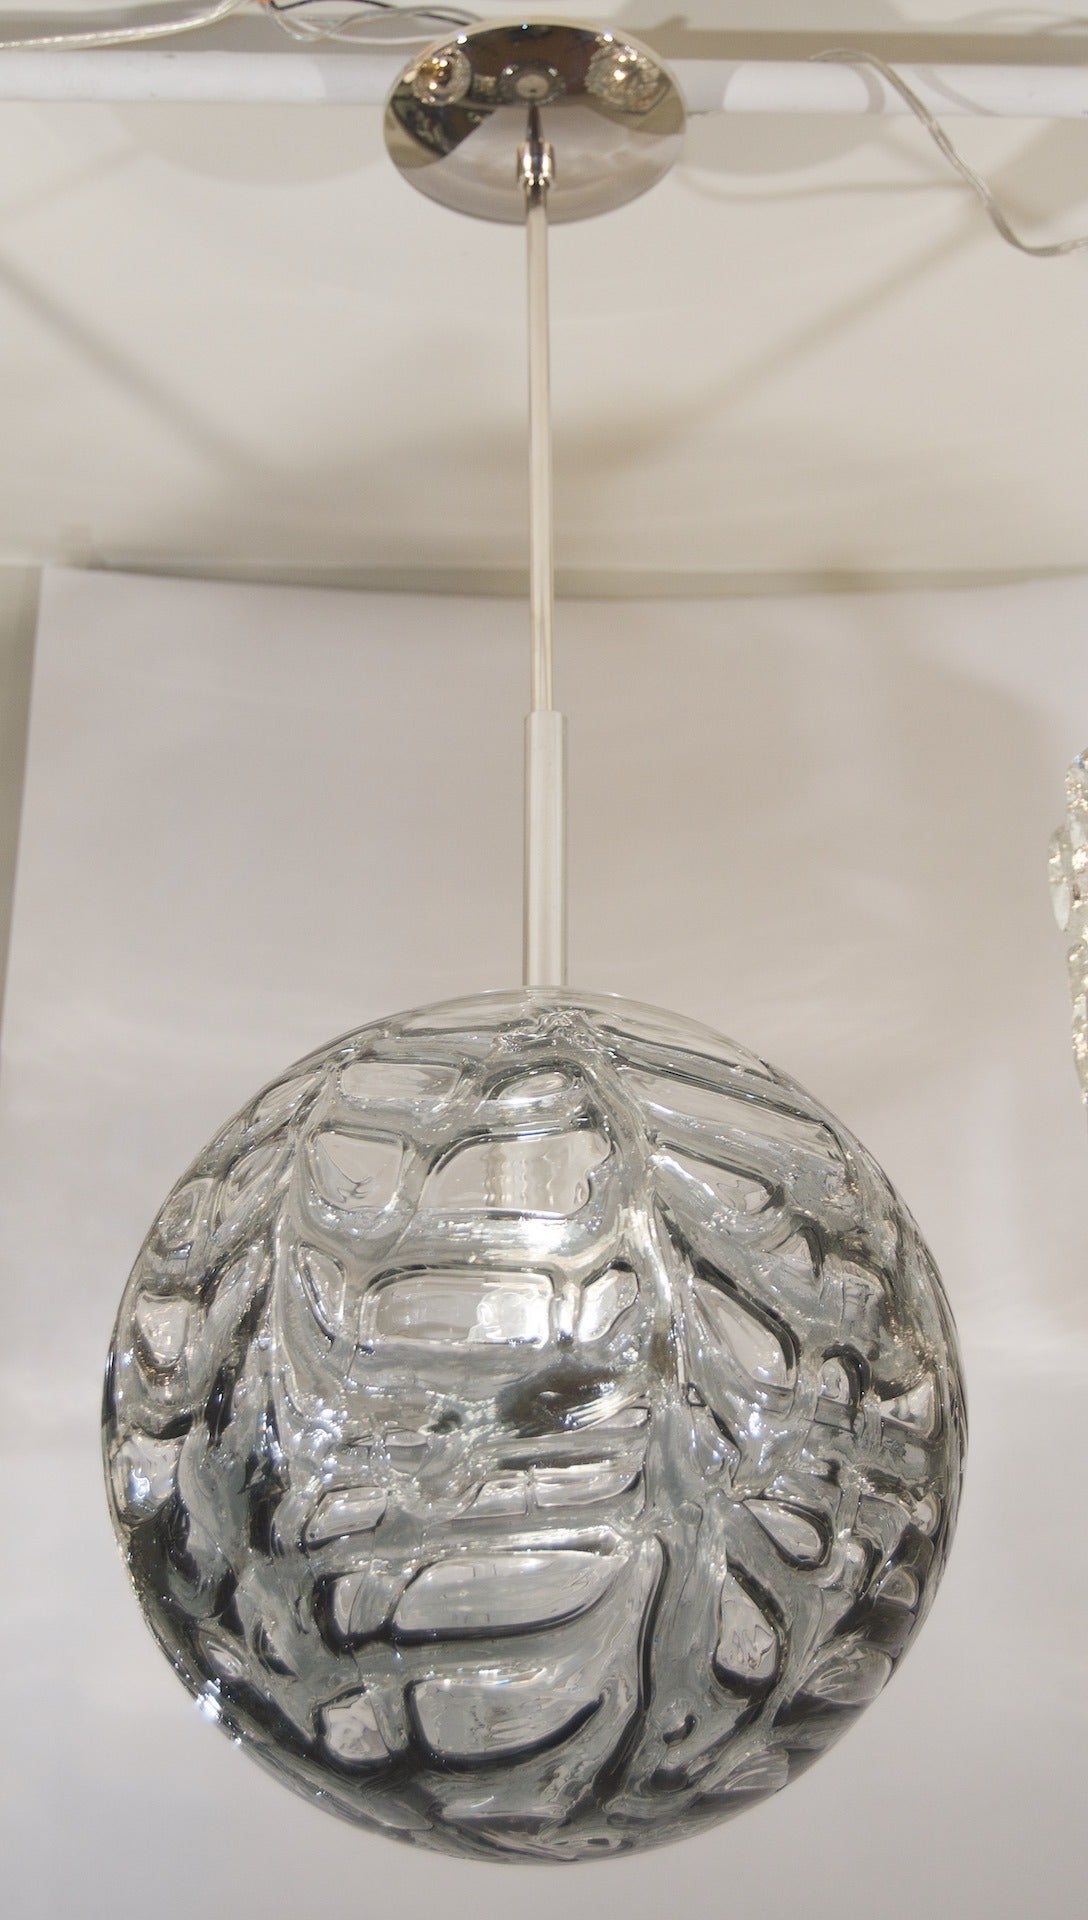 Elegant Doria pendant. Organic patterned smoke toned glass with chrome body complements all decors. 

Takes a single medium base bulb up to 100 watts, new wiring.
Length of drop rod can be adjusted.

See other listings for other sizes and tones